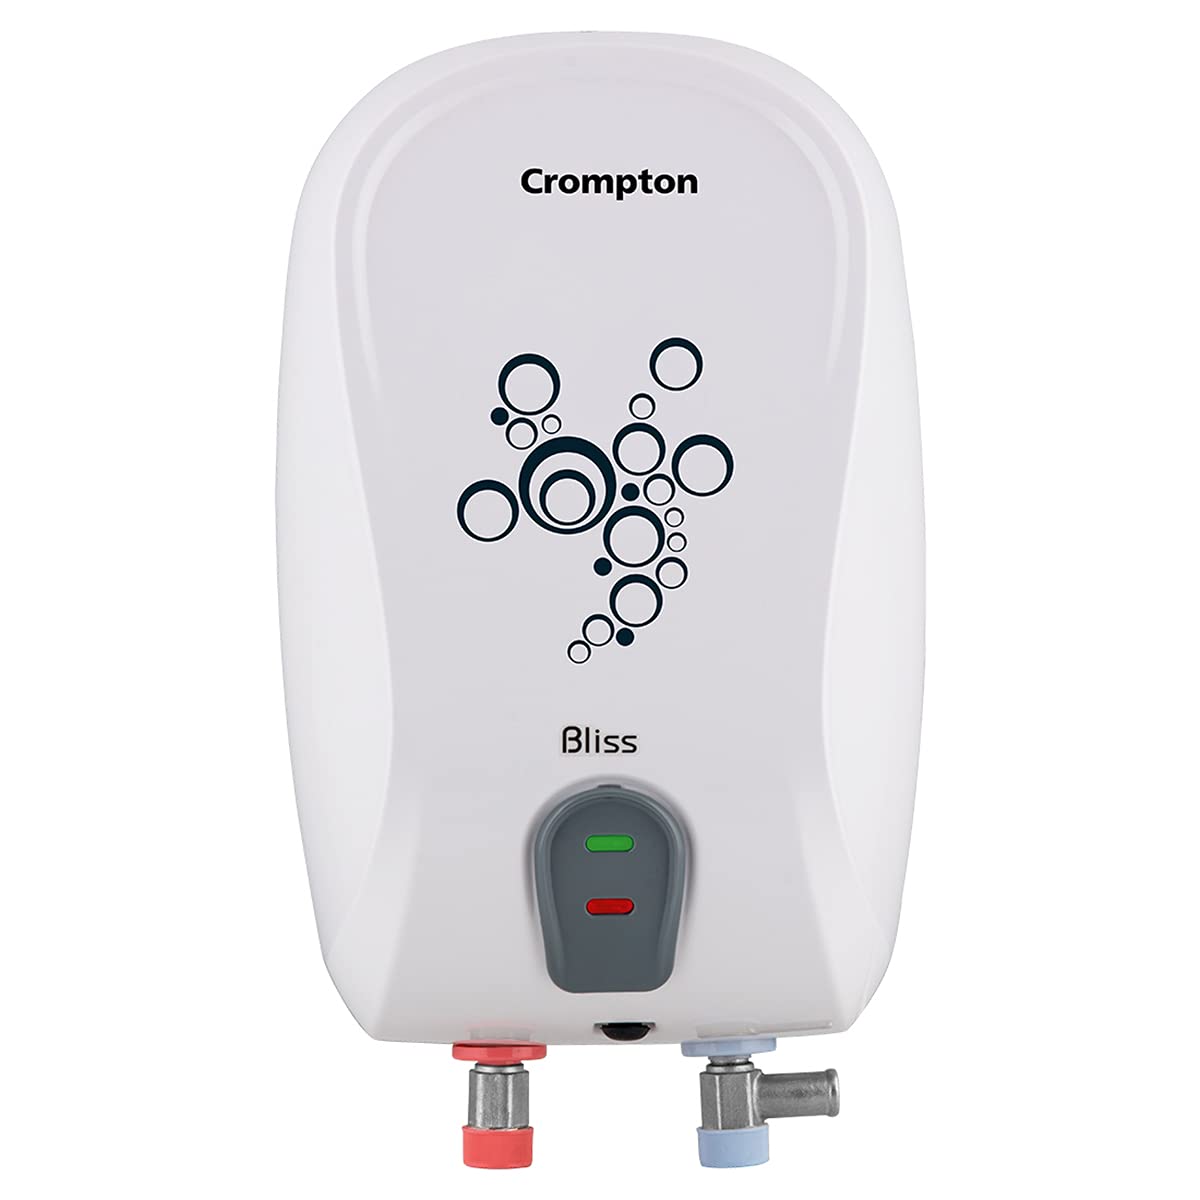 Crompton Bliss 3 Litre Instant Water Heater Review